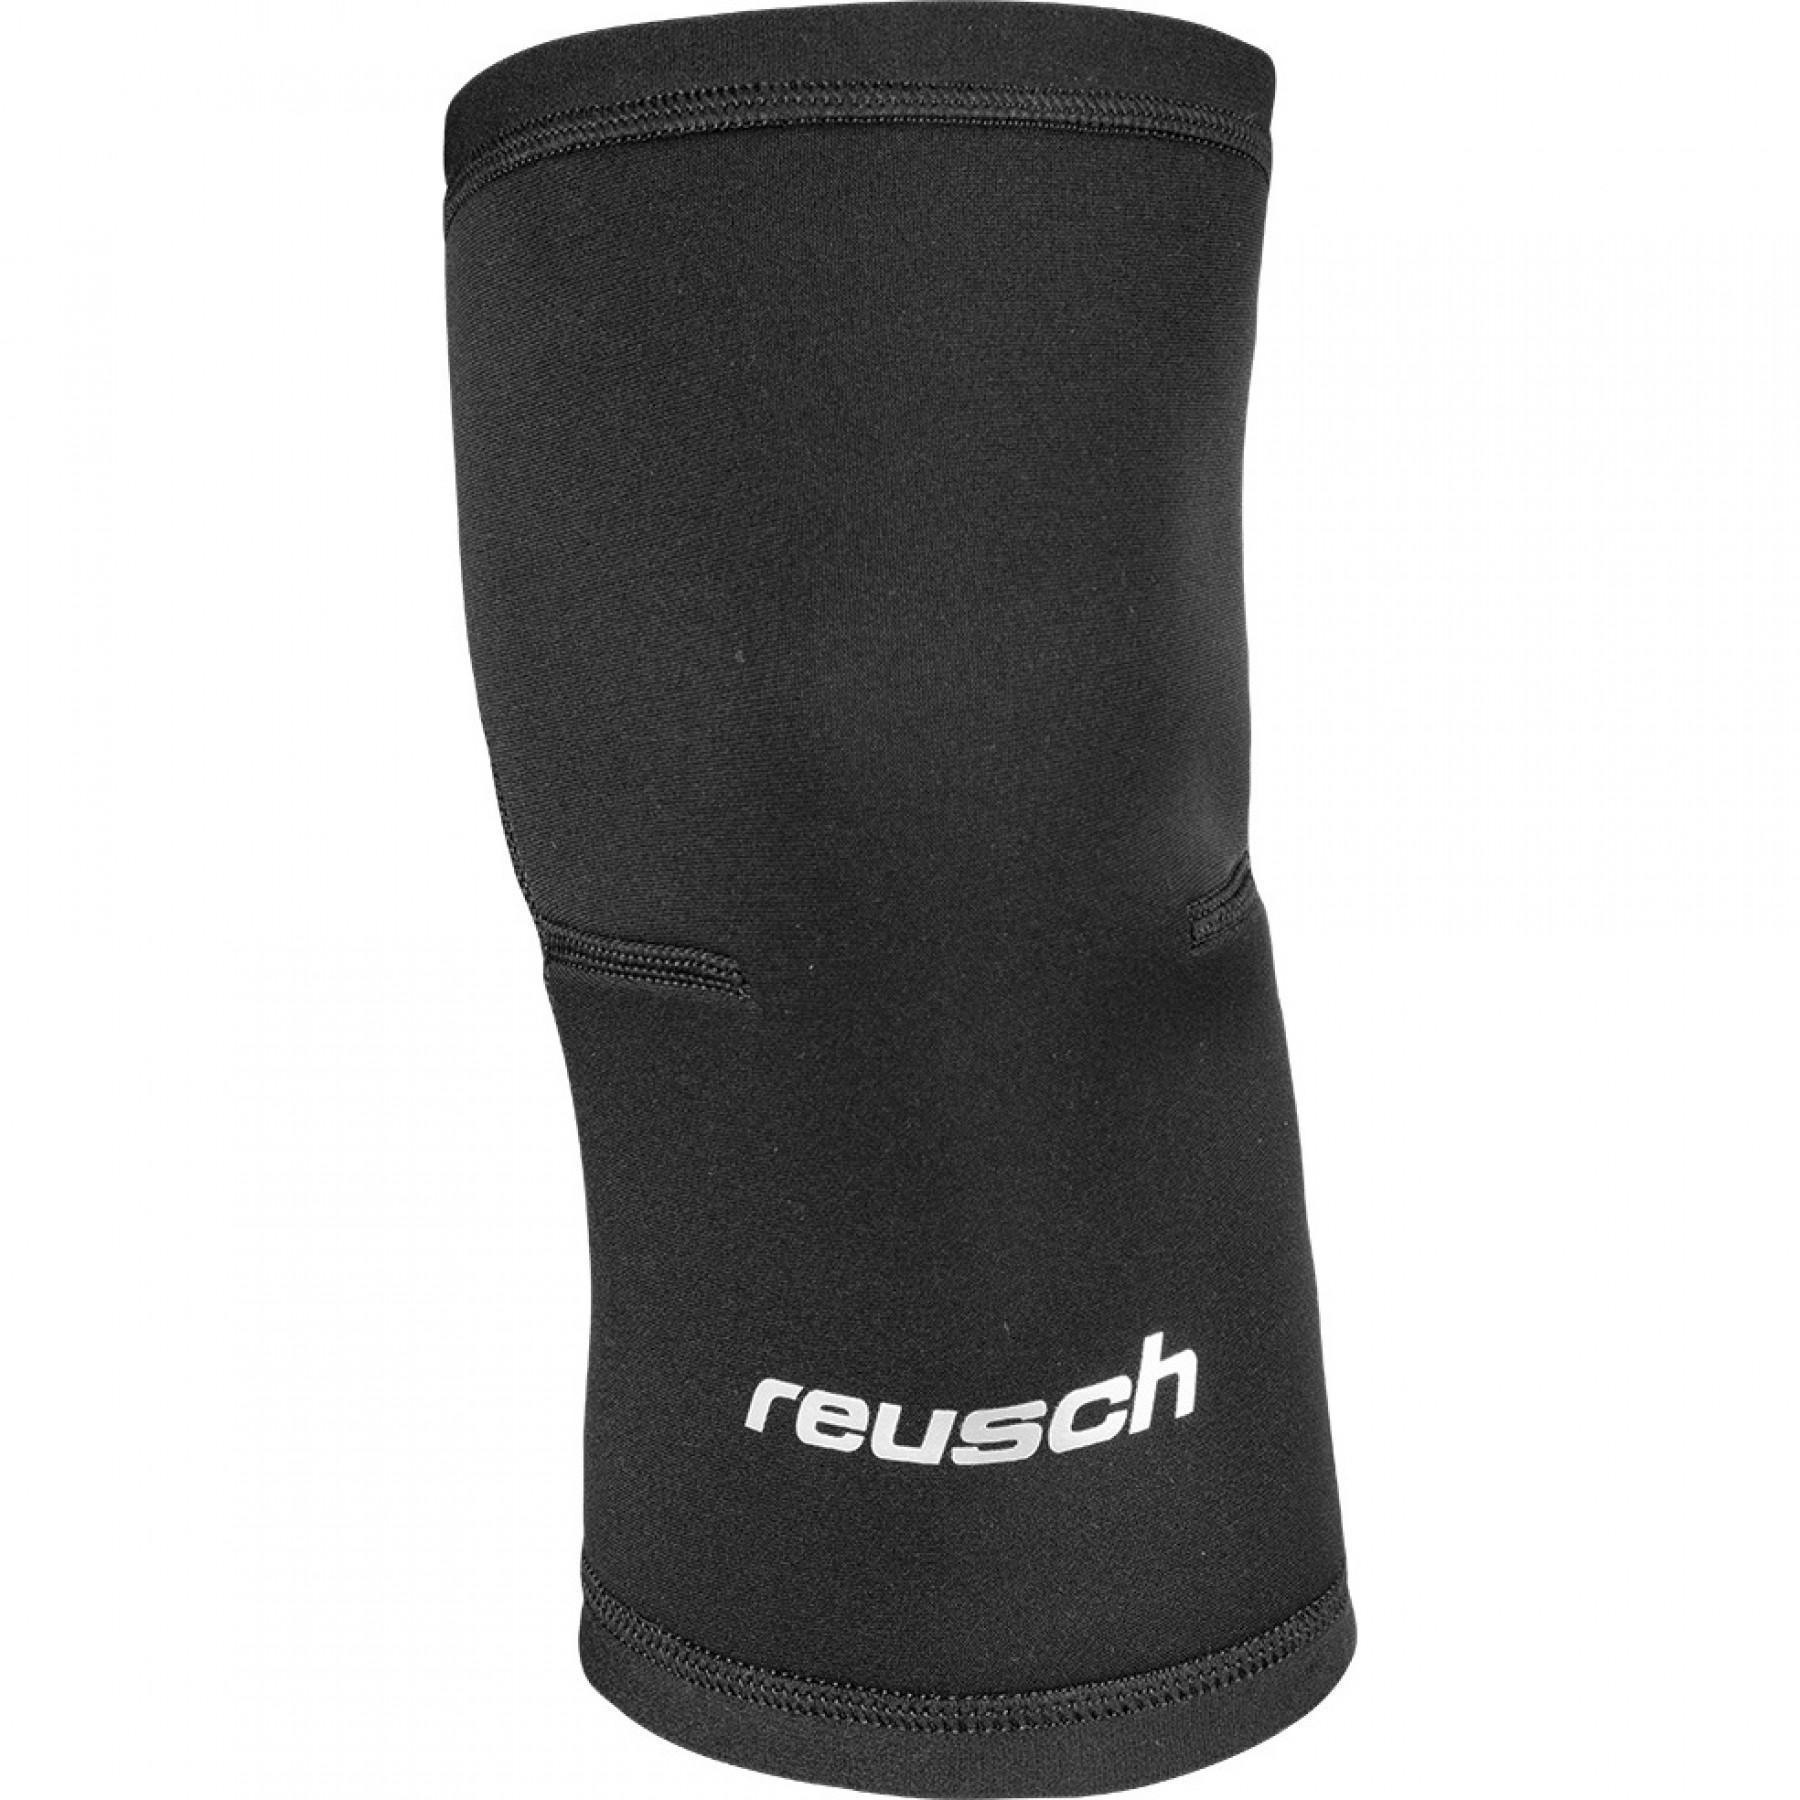 Compression knee pads for goalkeepers Reusch (x2)